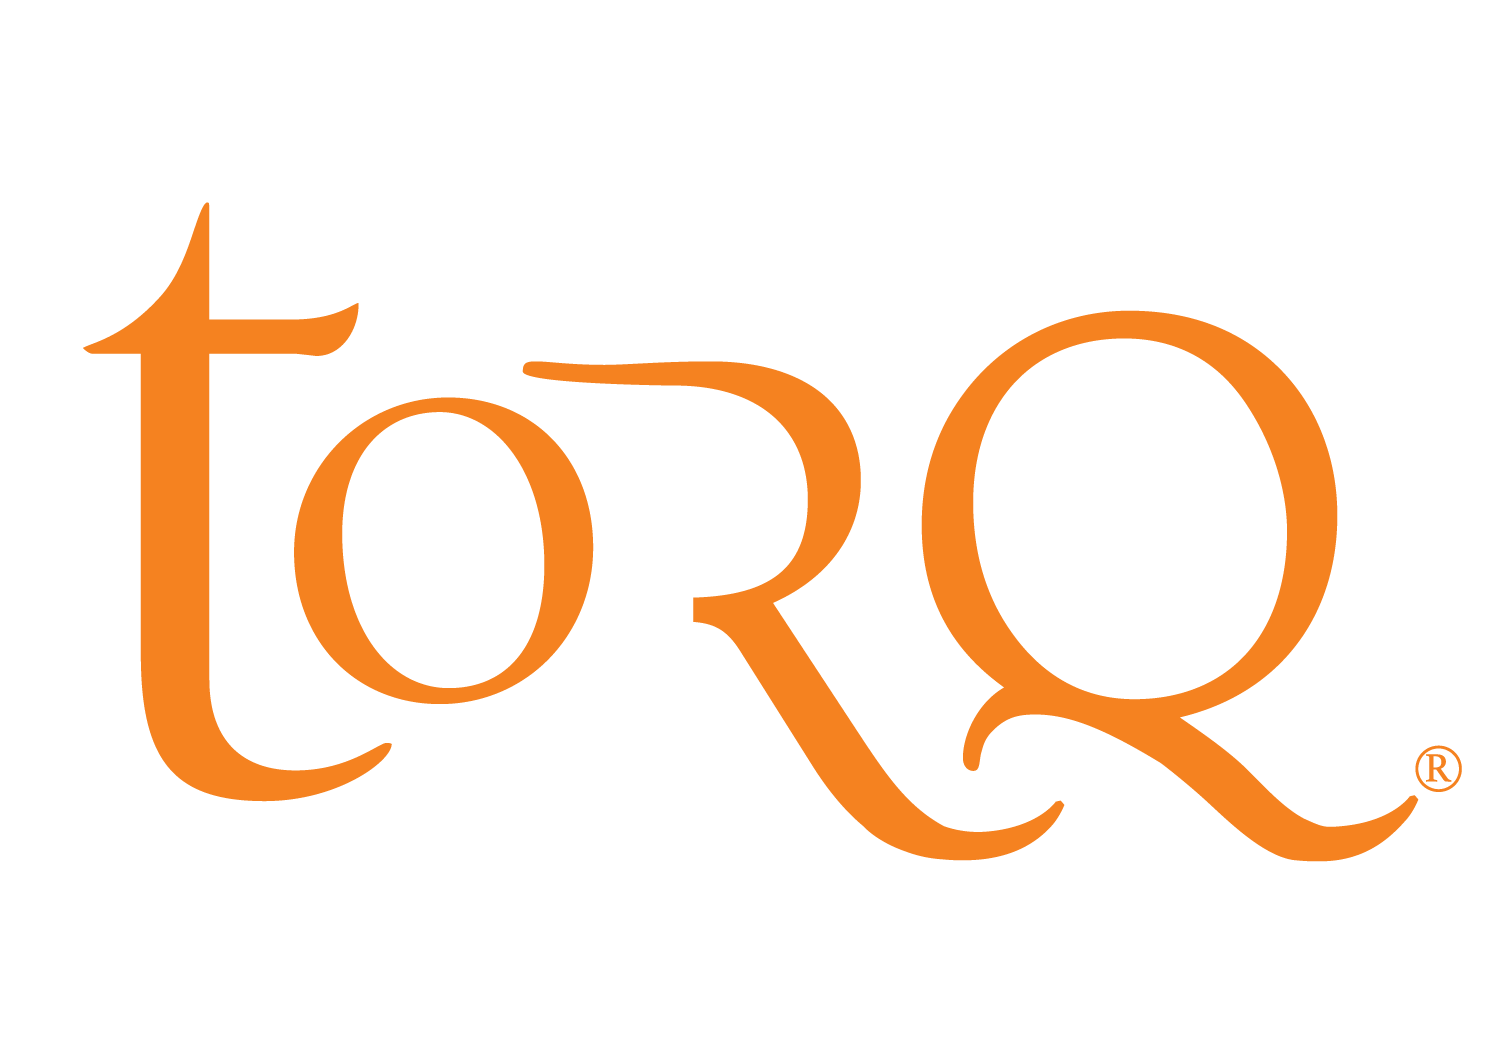 supporter: Torq